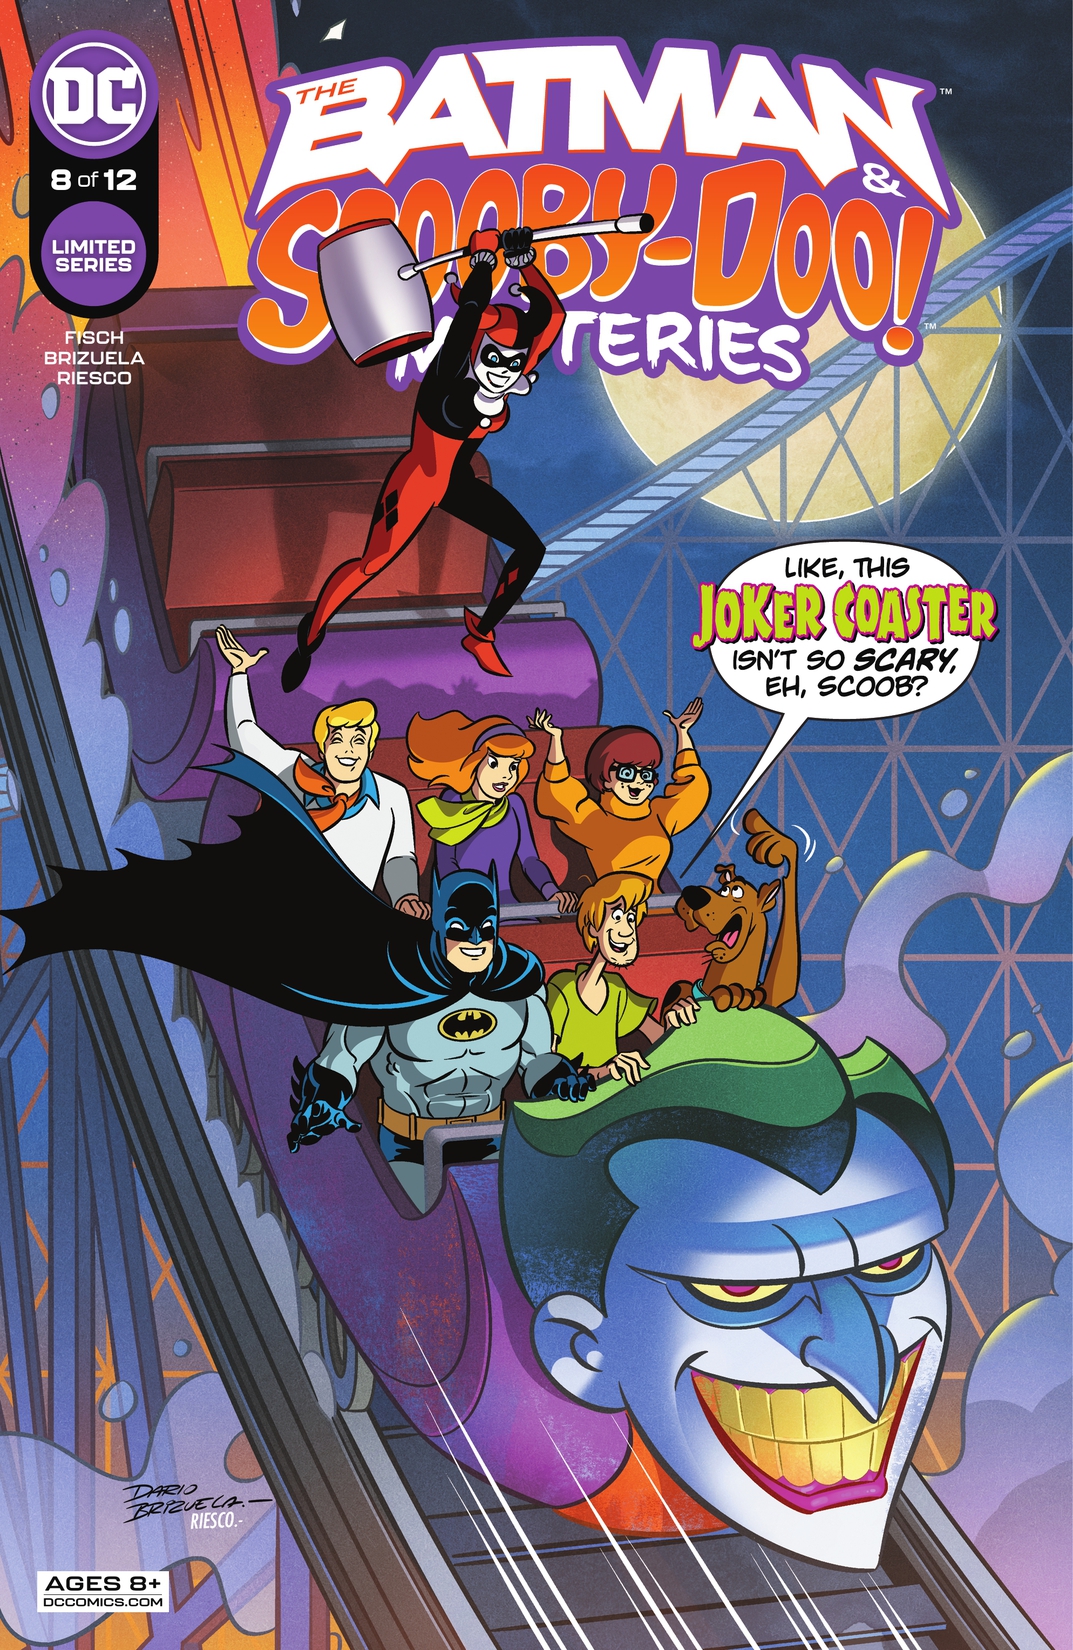 The Batman & Scooby-Doo Mysteries #8 preview images